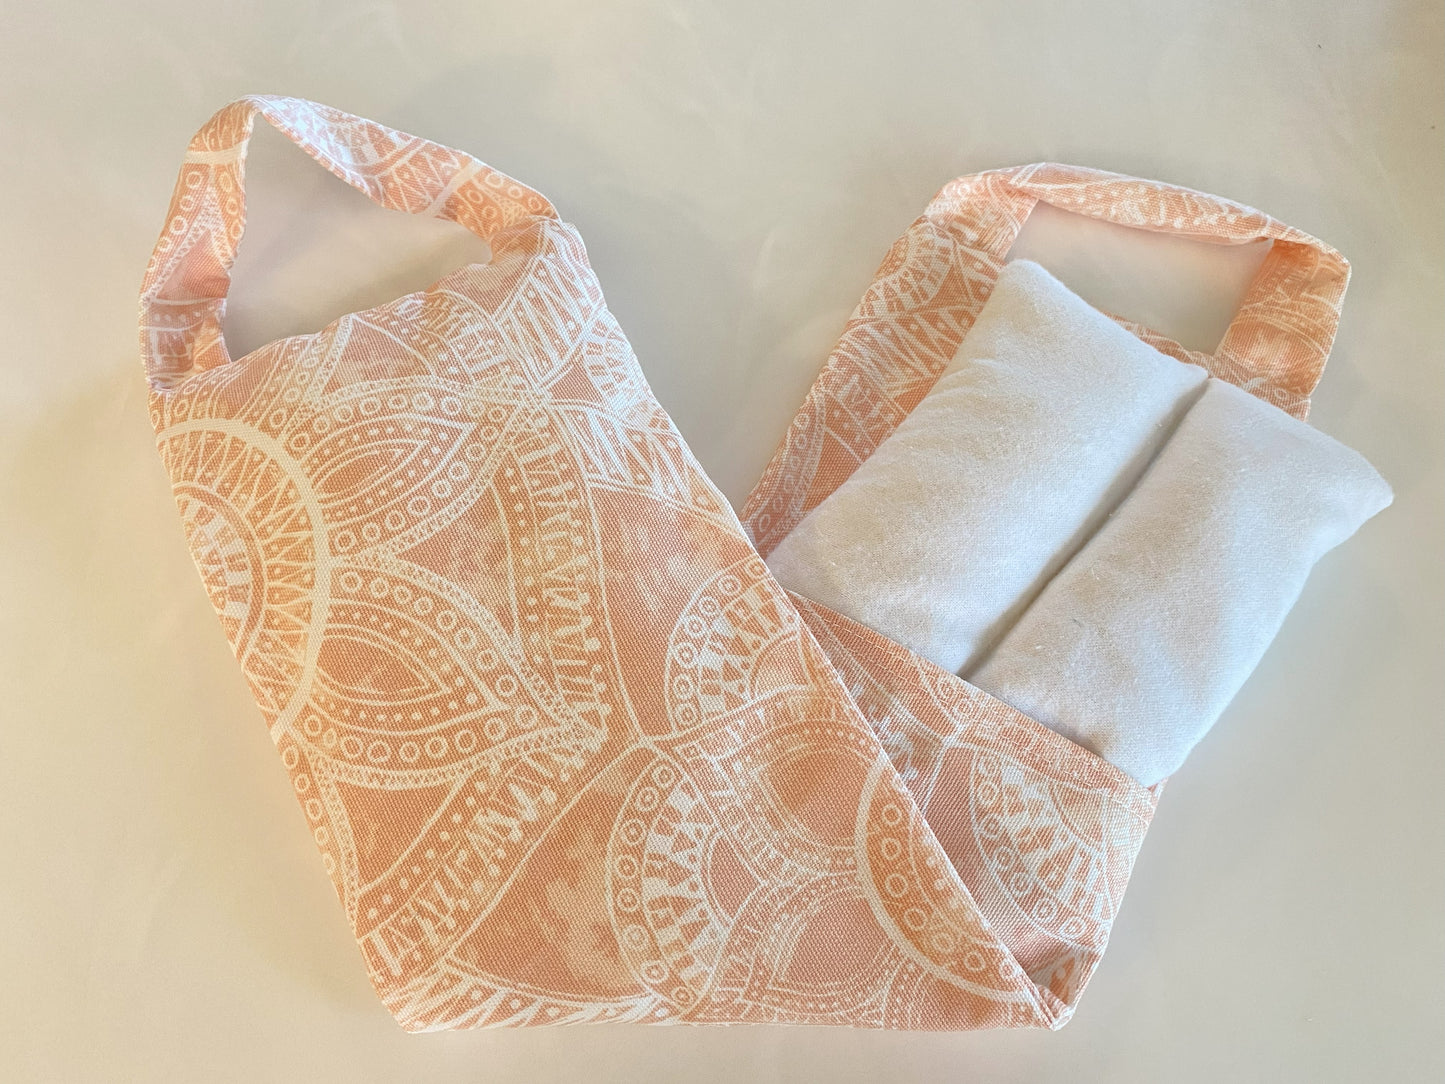 Washable Microwavable Rice Bag with Handles l Comfort Therapy Pack l Neck Wrap l Aromatherapy Bag l Misc. Prints